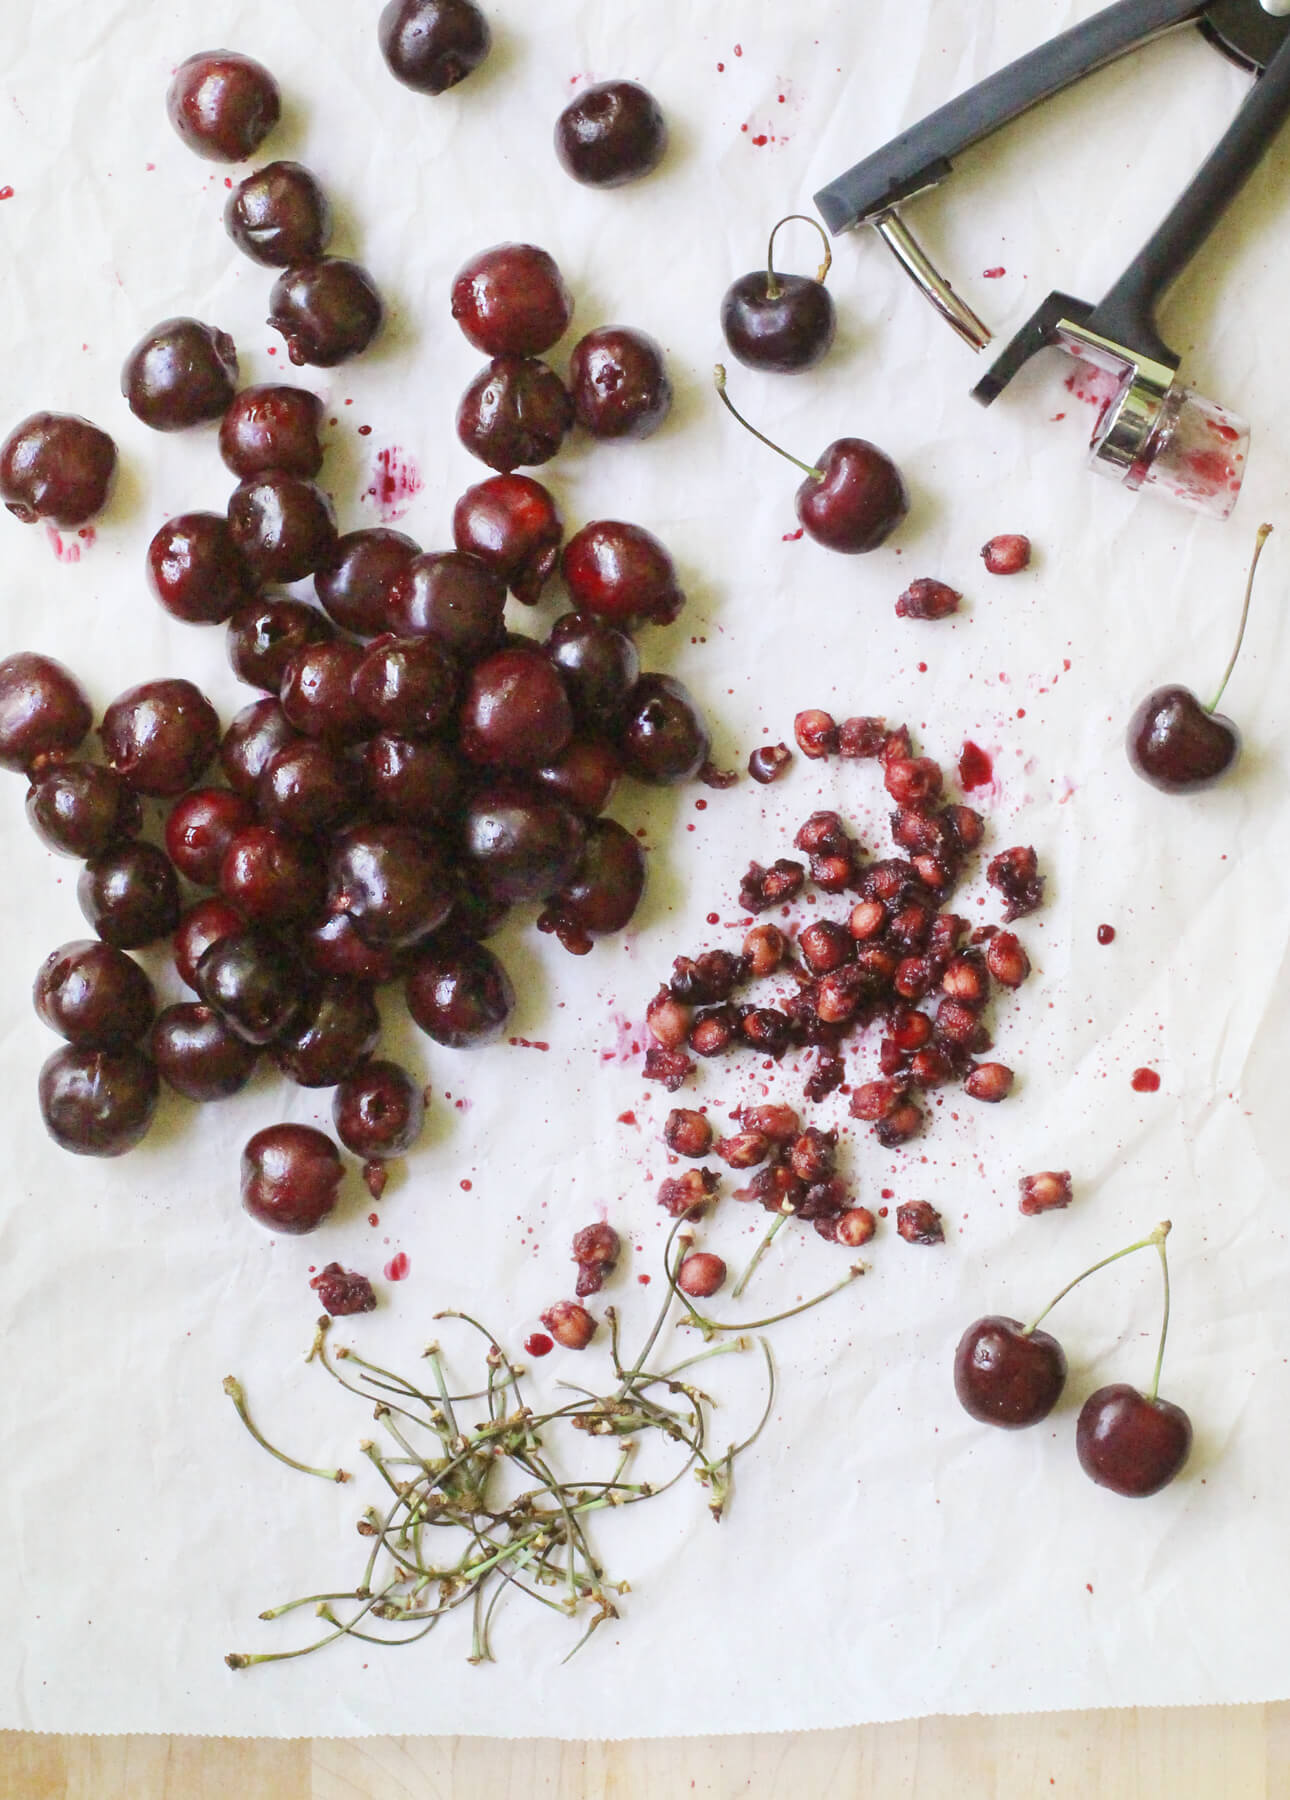 Pitting cherries is easy with a cherry pitter! A kitchen gadget that's worth every penny. // FoodNouveau.com